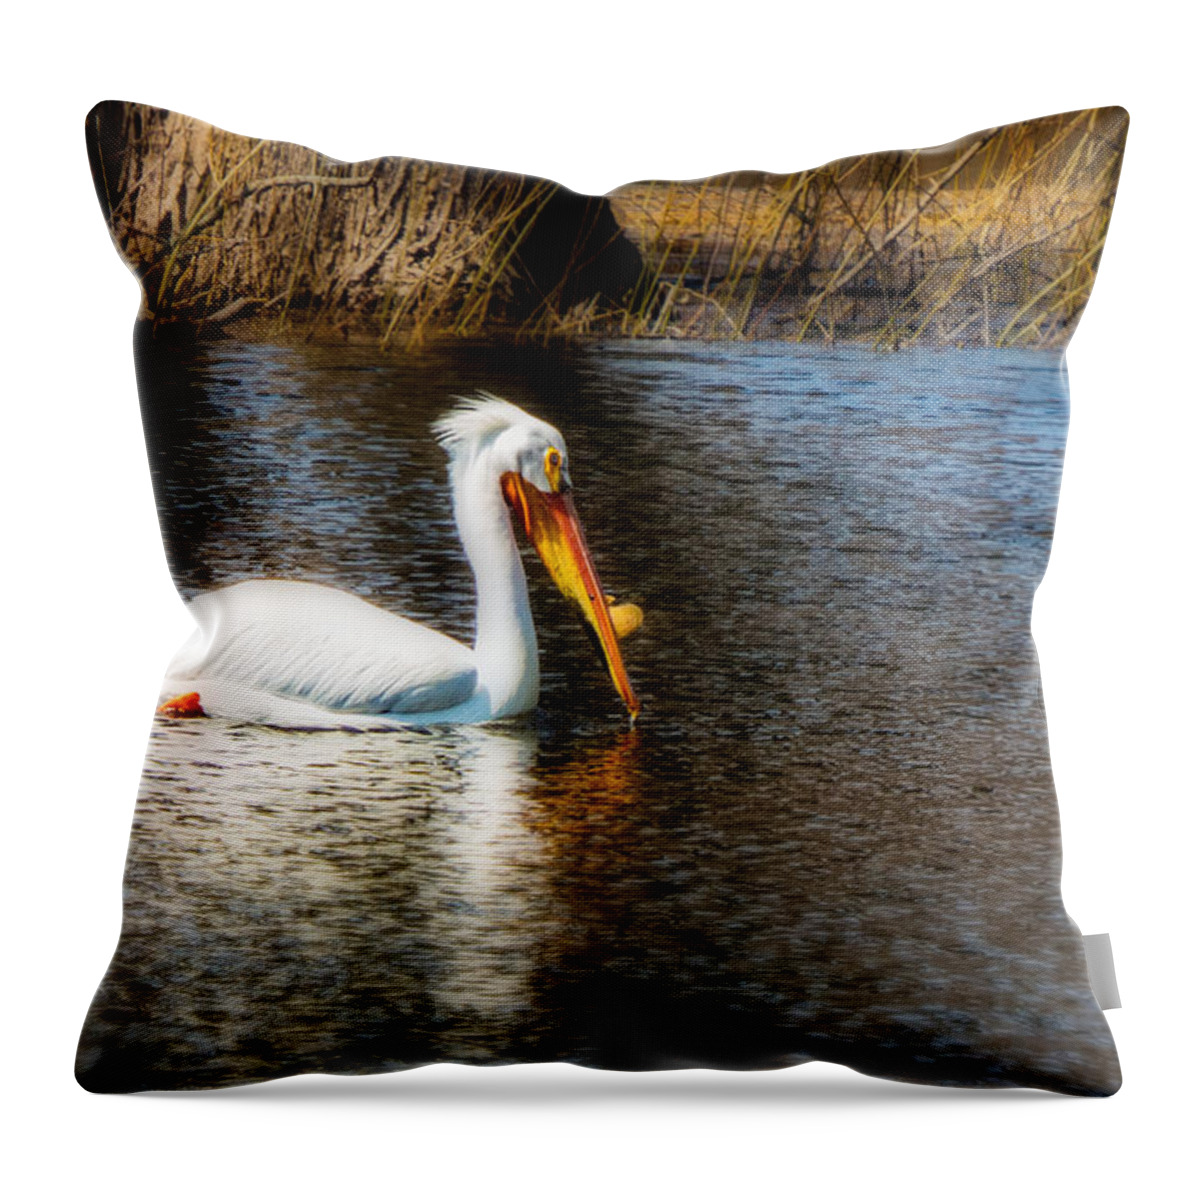 Pelican Bird Water Lake Pond River Beak Feather Feathers Plume Spring Summer Sun Ripple Water Tree Branch Twig Grass Reeds Knob Swim Blue White Yellow Red Orange Impressionist Impressionism Wall Hang Decorate Sell Real Estate Stage Staging Pelecanus Erythrorhynchos American White Pelican Redecorate Throw Pillow featuring the photograph Pelican #1 by Tom Gort